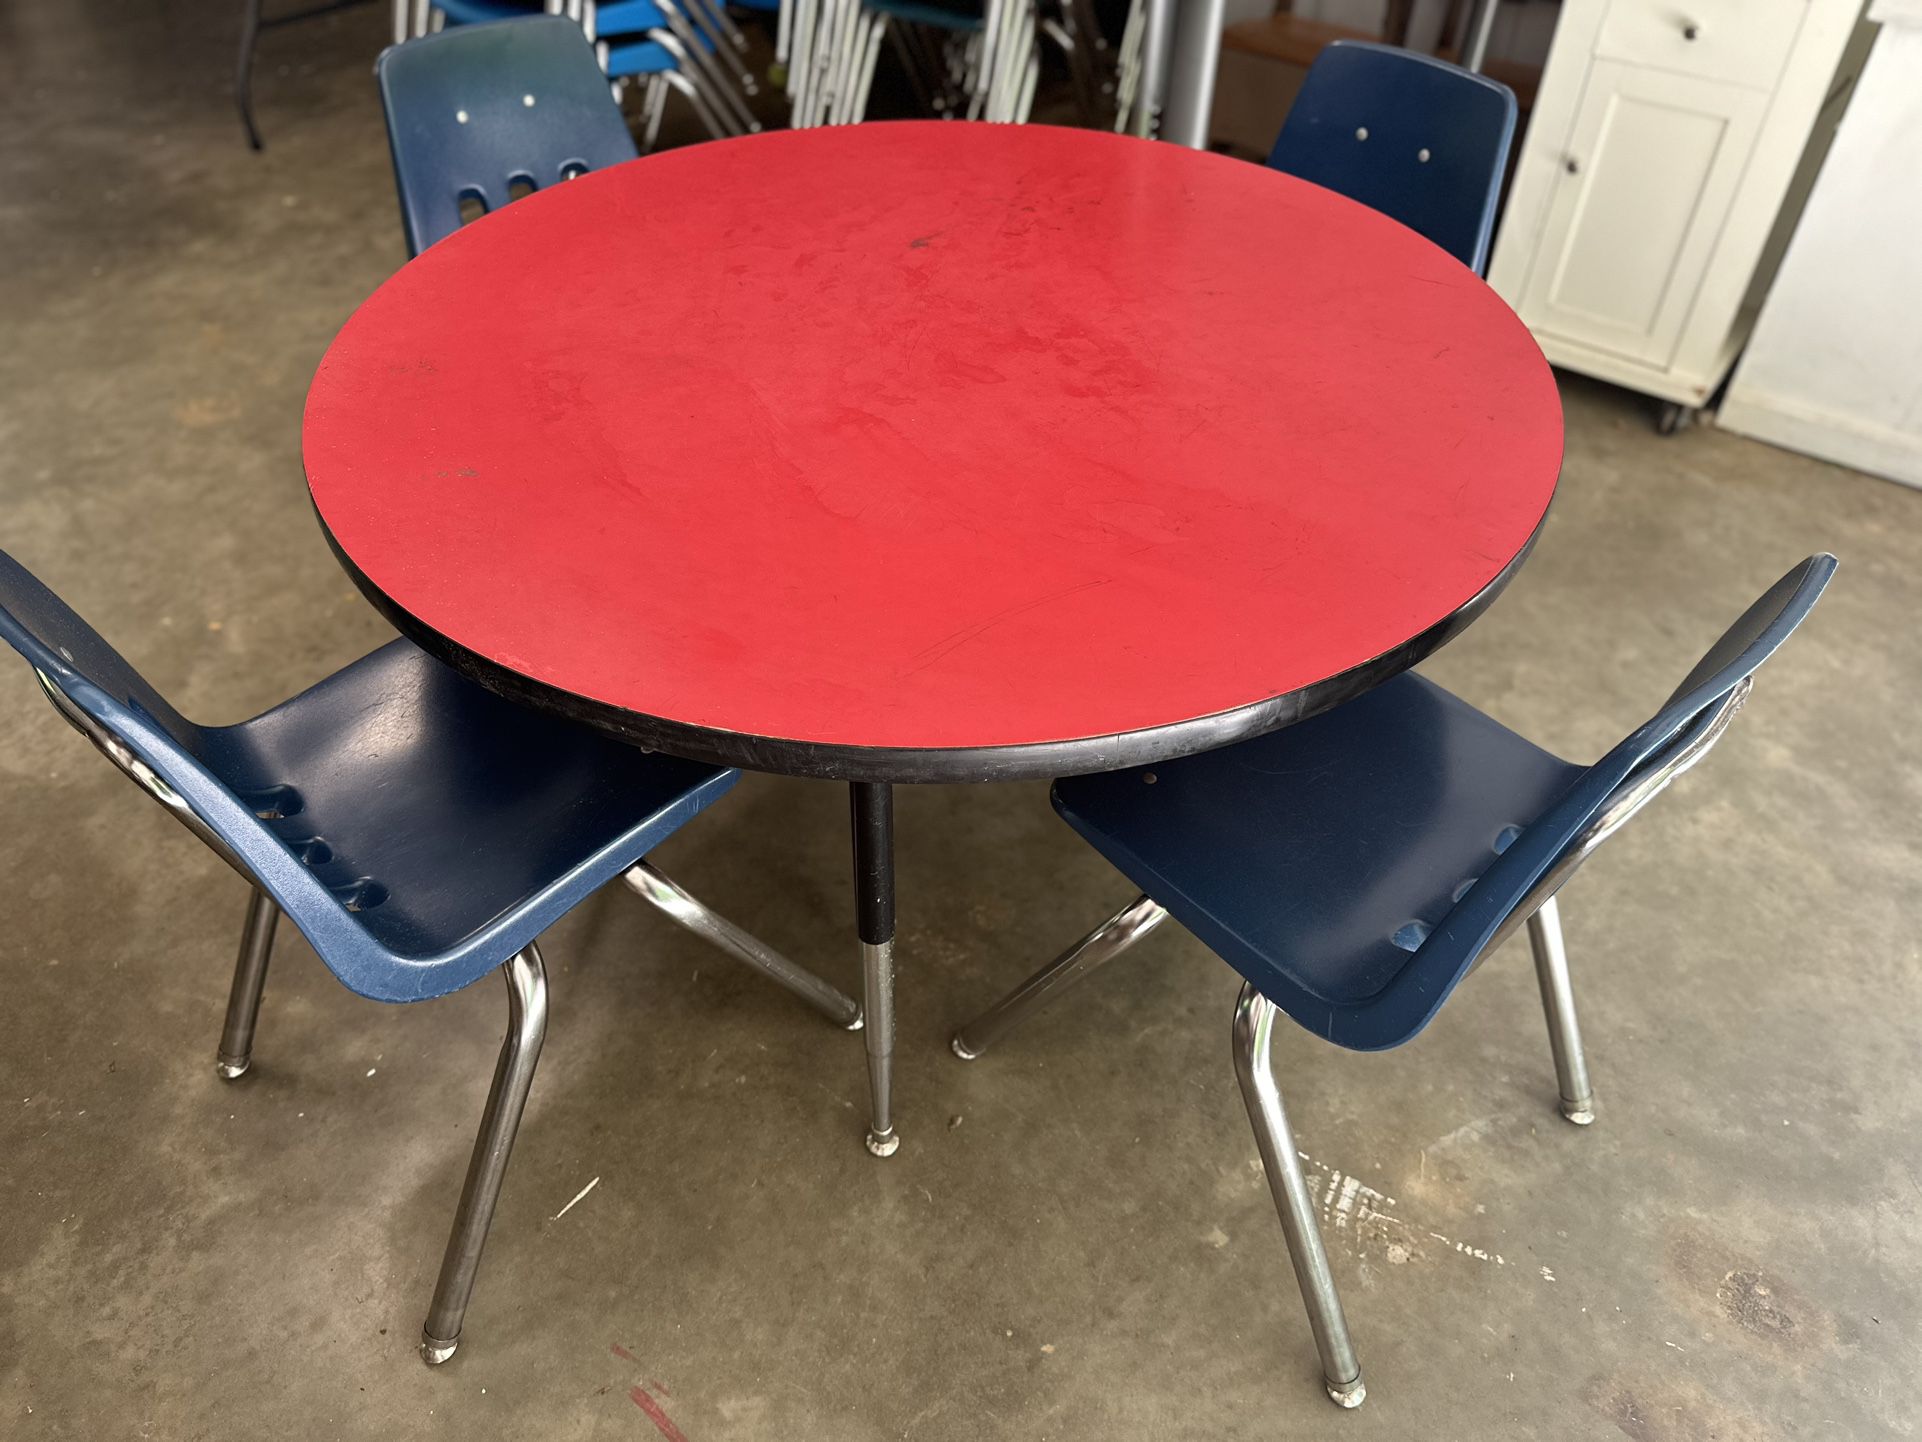 Kids Arts And Crafts Learning Table with Four Chairs